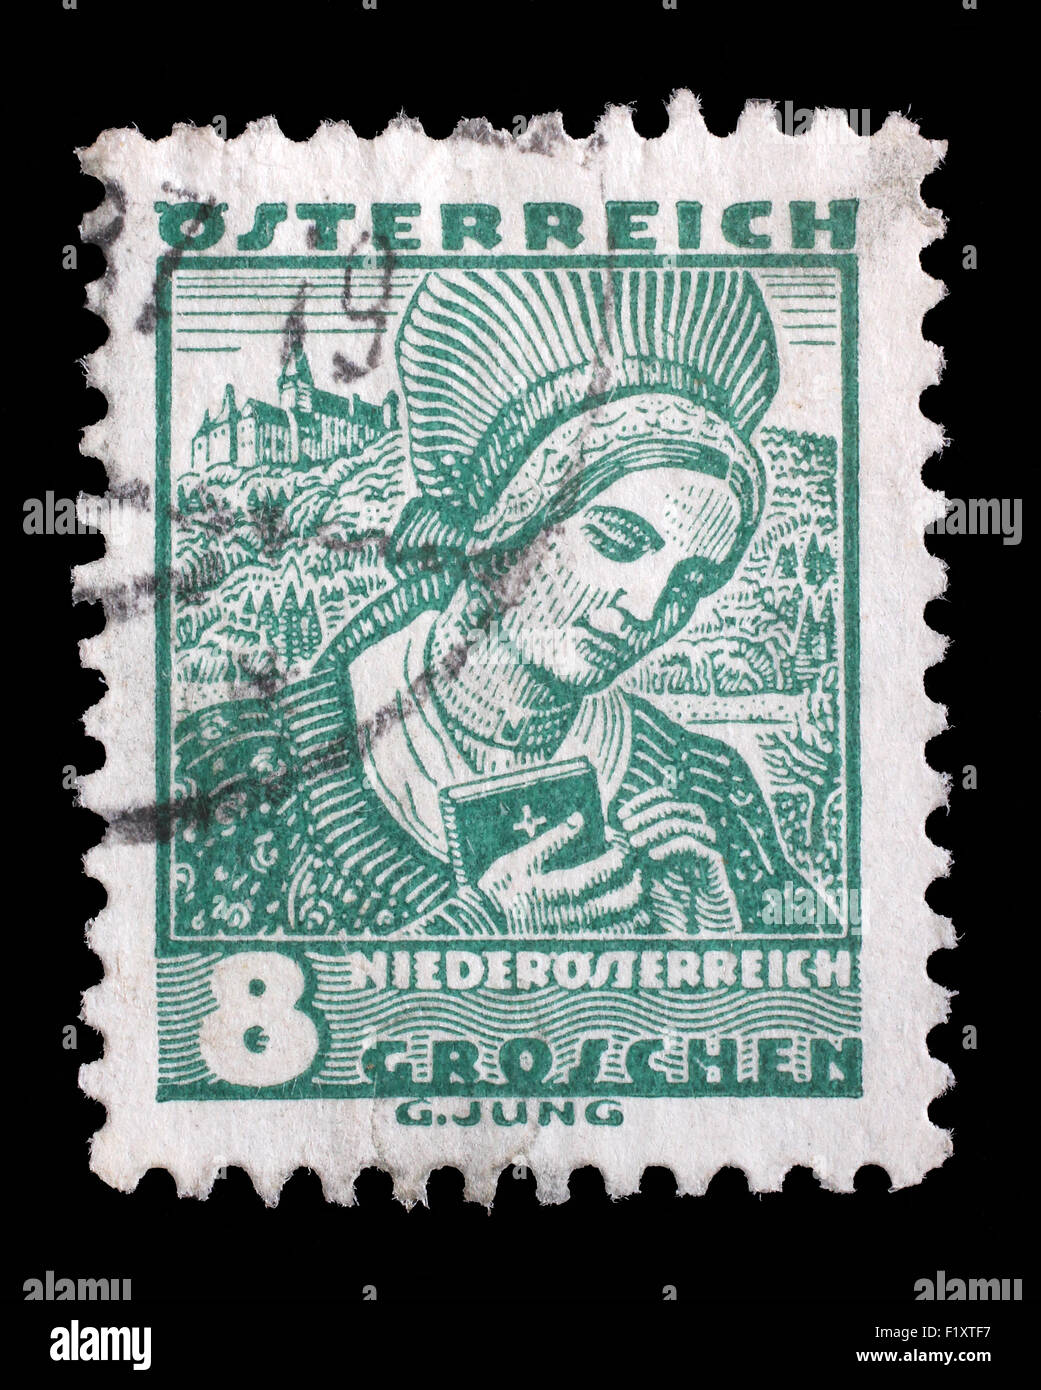 Stamp printed by AUSTRIA shows Woman from Lower Austria (Niederosterreich), Traditional folk costume, circa 1934. Stock Photo